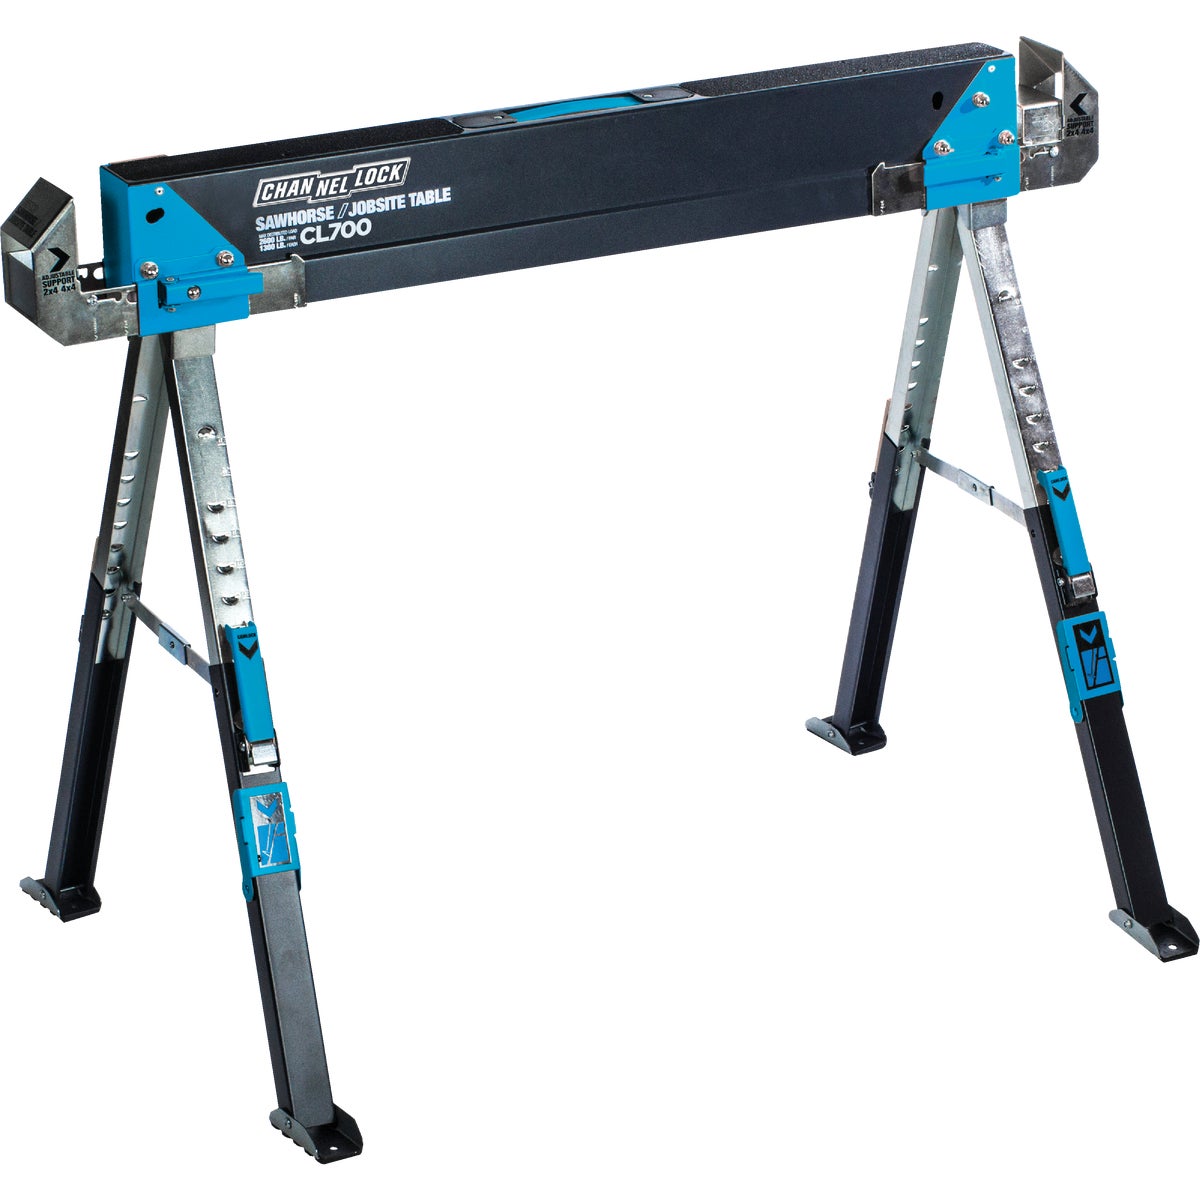 Channellock 39-1/4 to 45-3/4 In. Long Steel Adjustable Sawhorse, 1300 Lb. Capacity